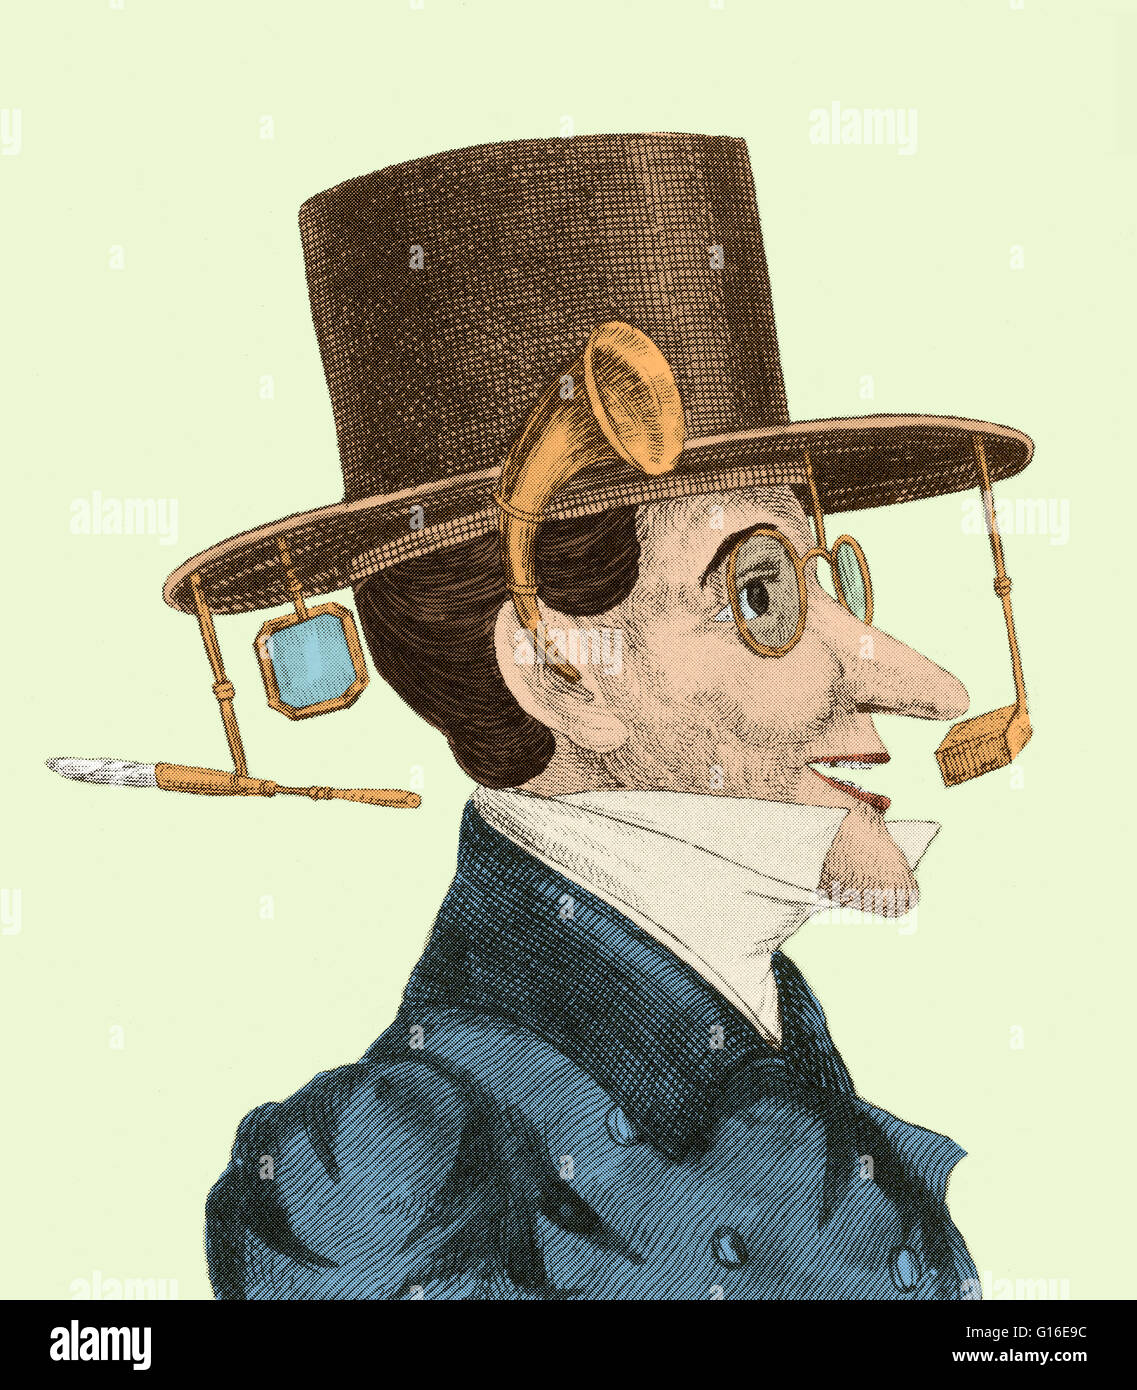 Undated hat design to keep pockets from being picked. The man has securely fastened his possessions to the brim of his hat. Upon slight pressure from the wearer, the top hat rotates and presents him with his scent box, monocle, hearing apparatus, bifocals Stock Photo